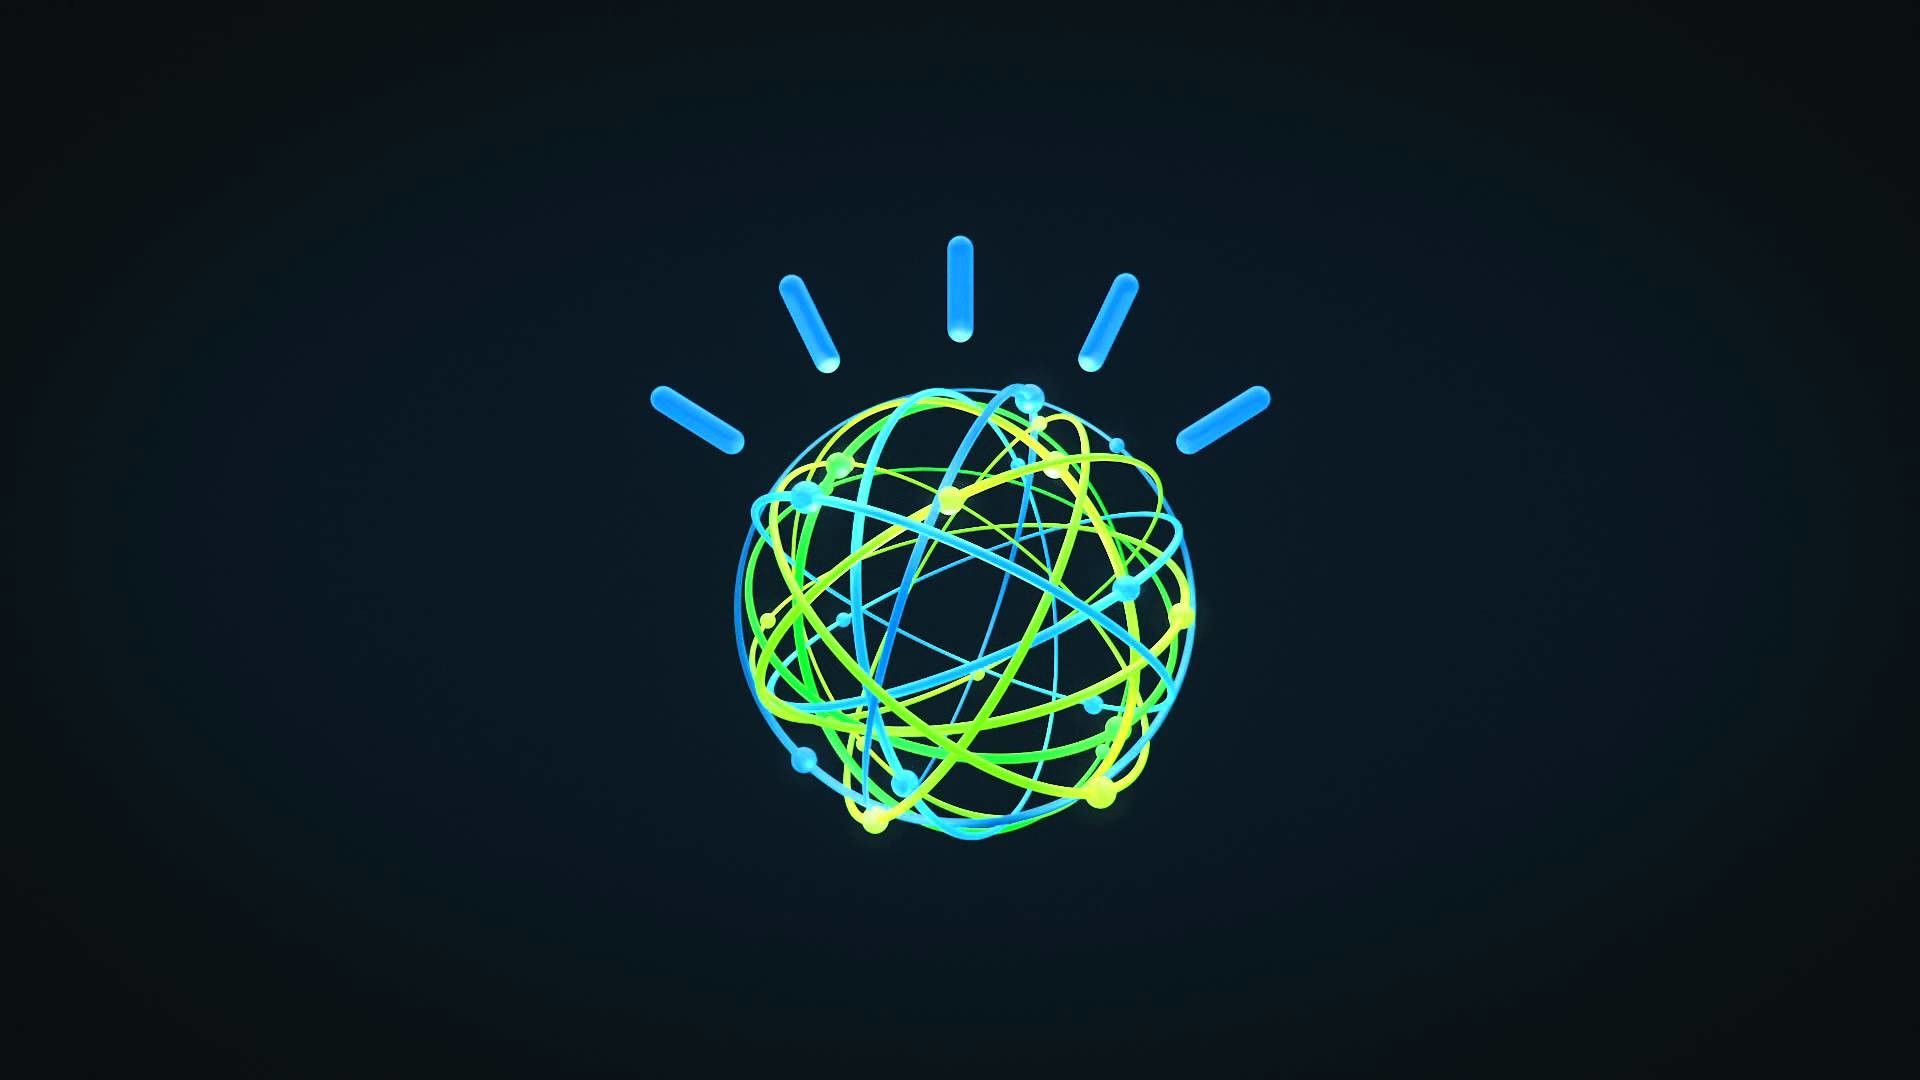 Ibm Wall Paper Wallpapers